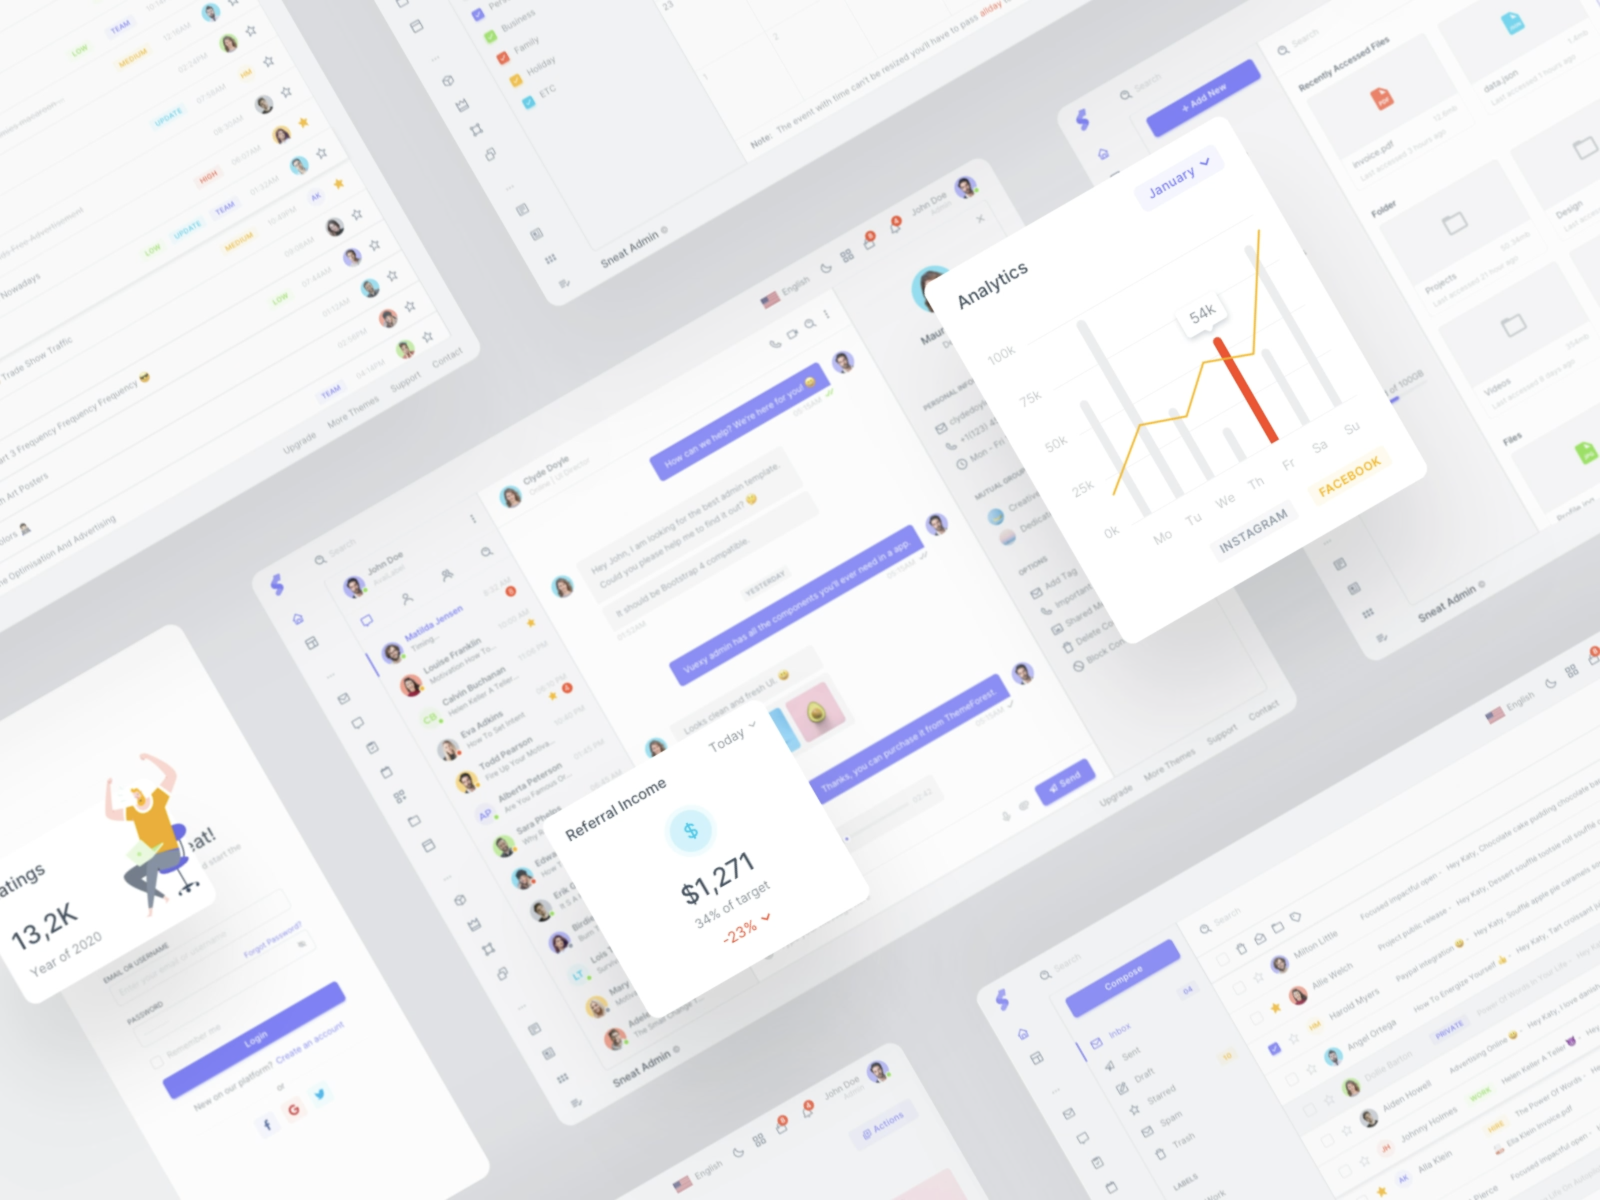 Sneat Clean &amp; Minimal Dashboard UI Kit&#39;s Apps, Pages &amp; Widgets